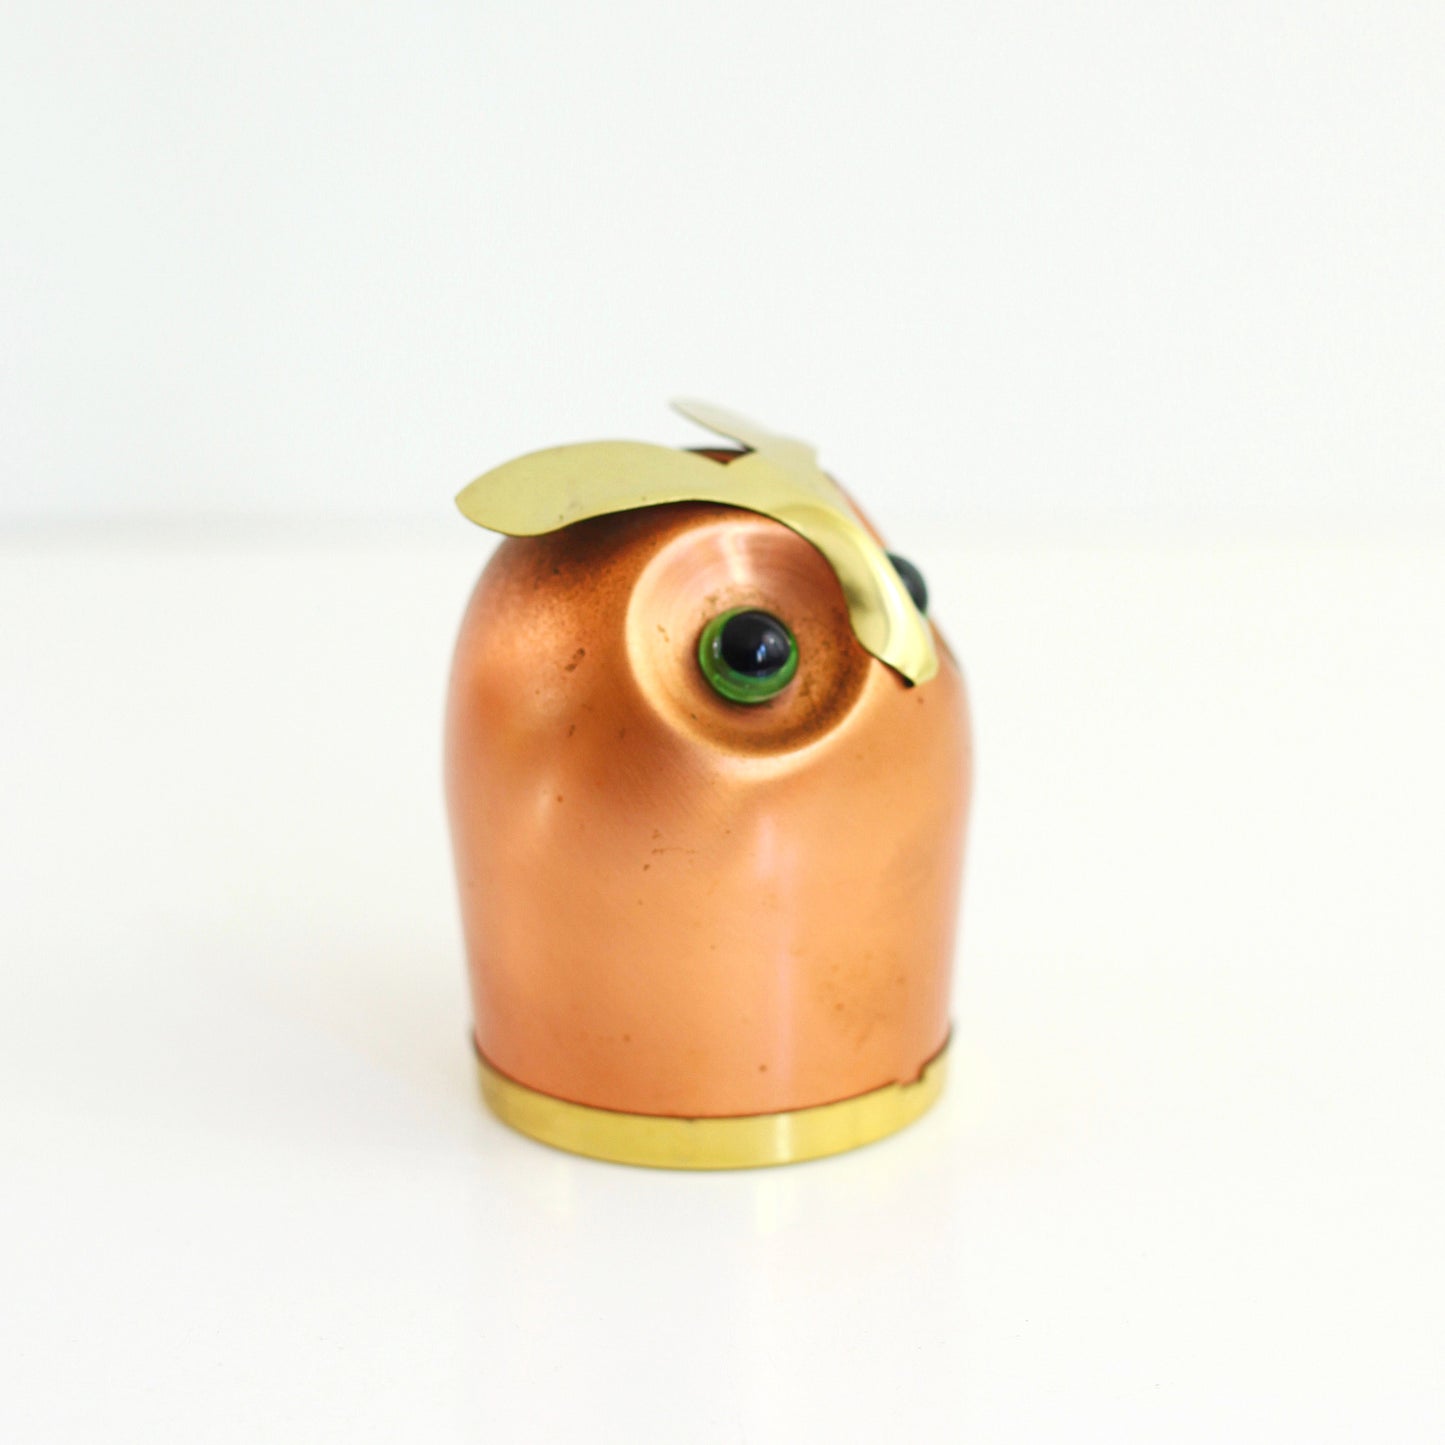 SOLD - Mid Century Copper and Brass Owl Bank by Coppercraft Guild